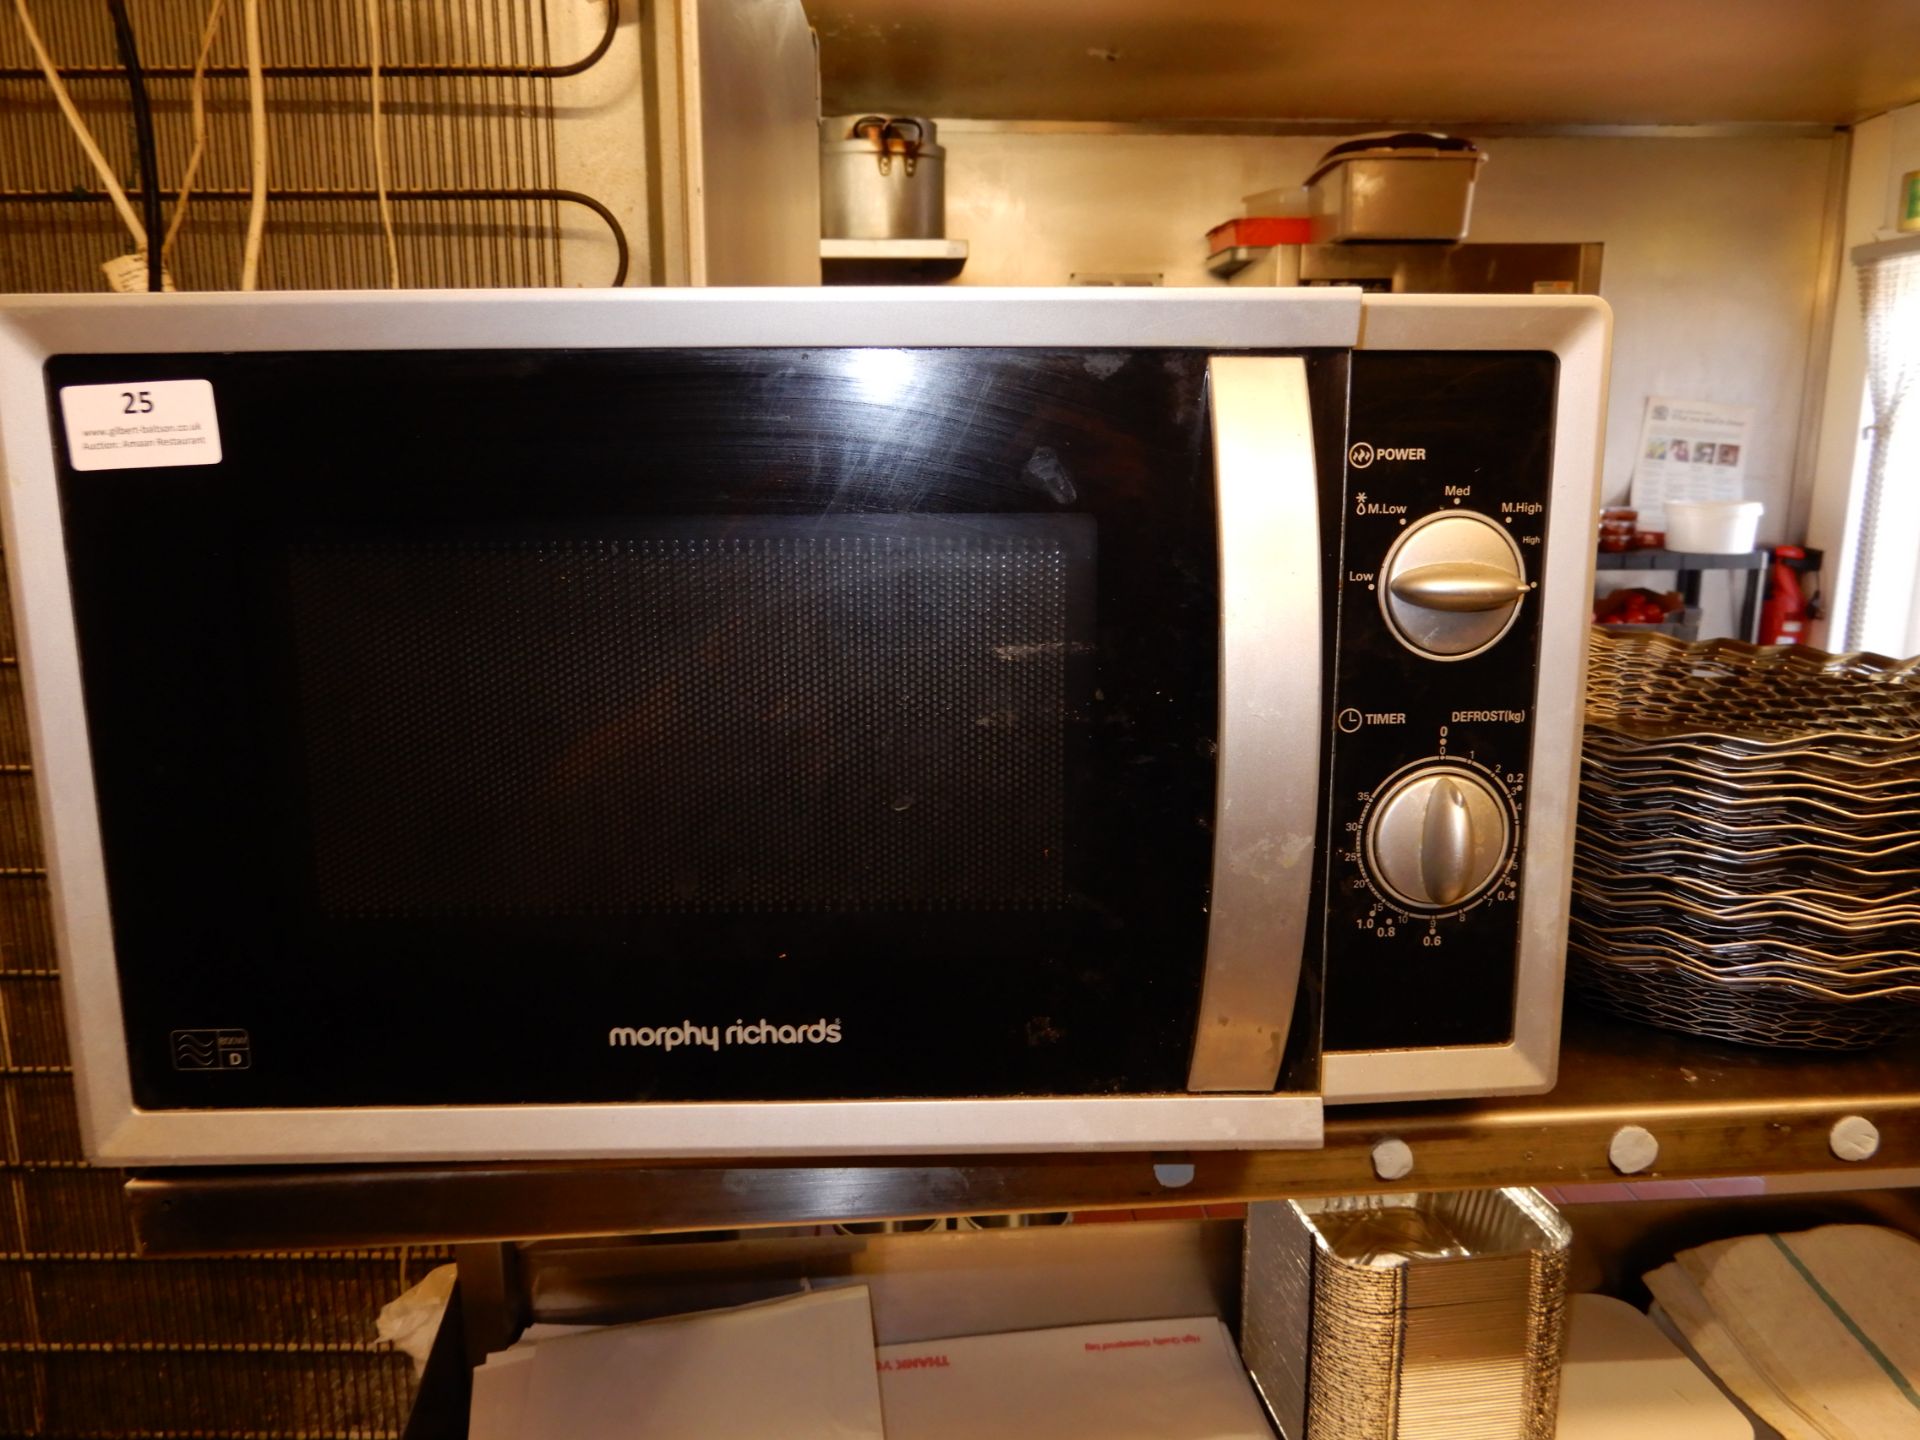 *Morphy Richards Domestic Microwave Oven